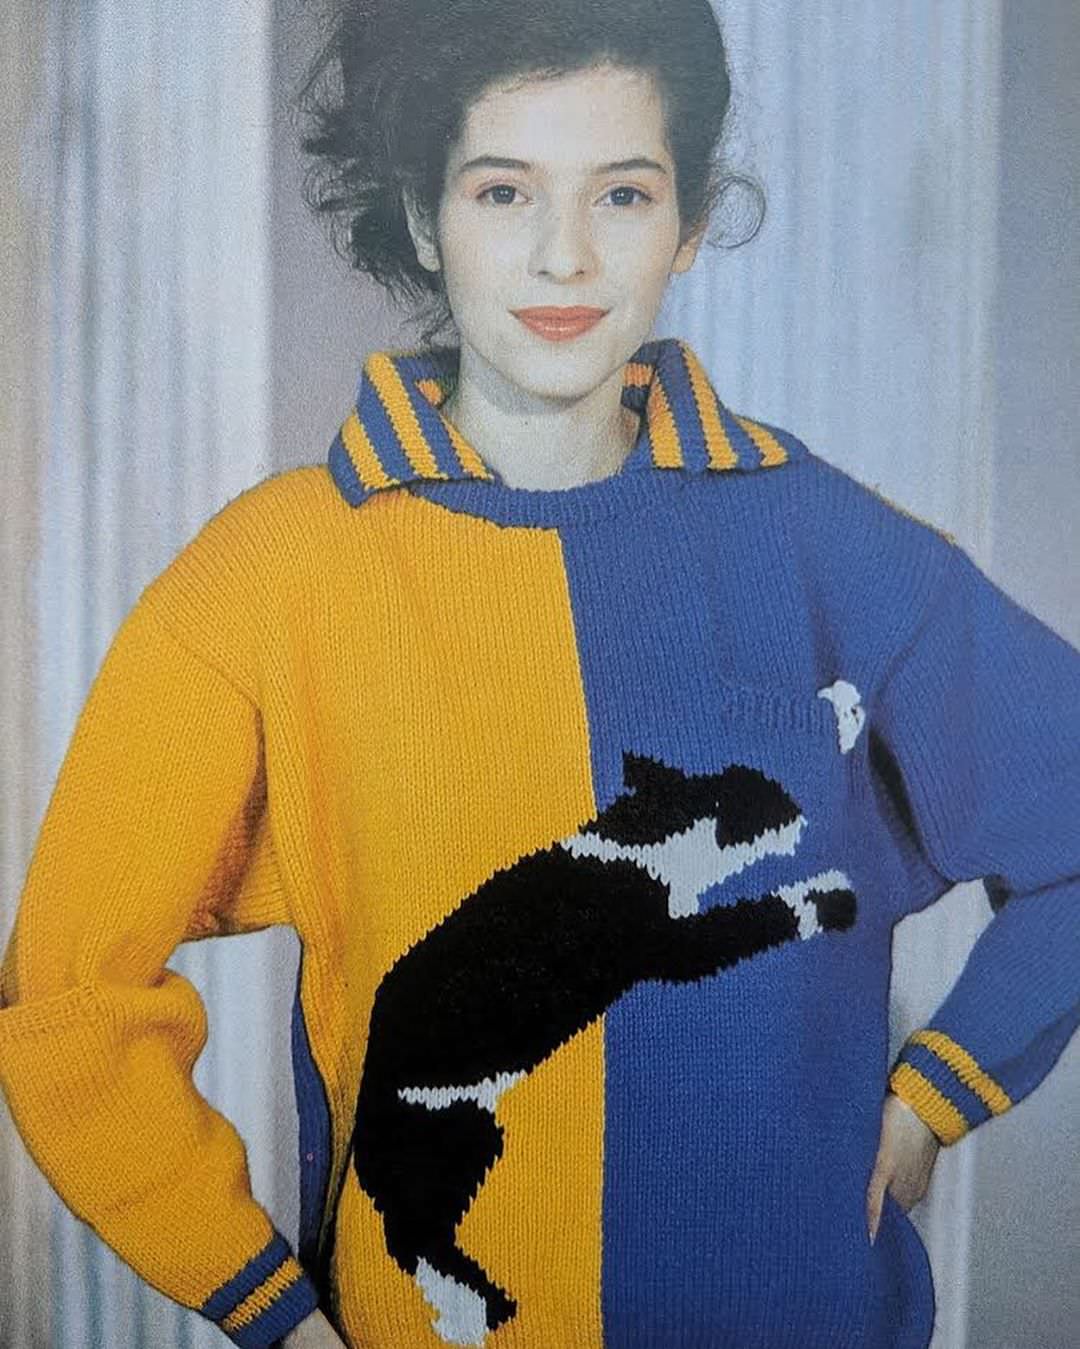 Lost Knitwear Fashion: These Beautiful Knitted Garments Were All The Rage In The 60s, 70s And 80s